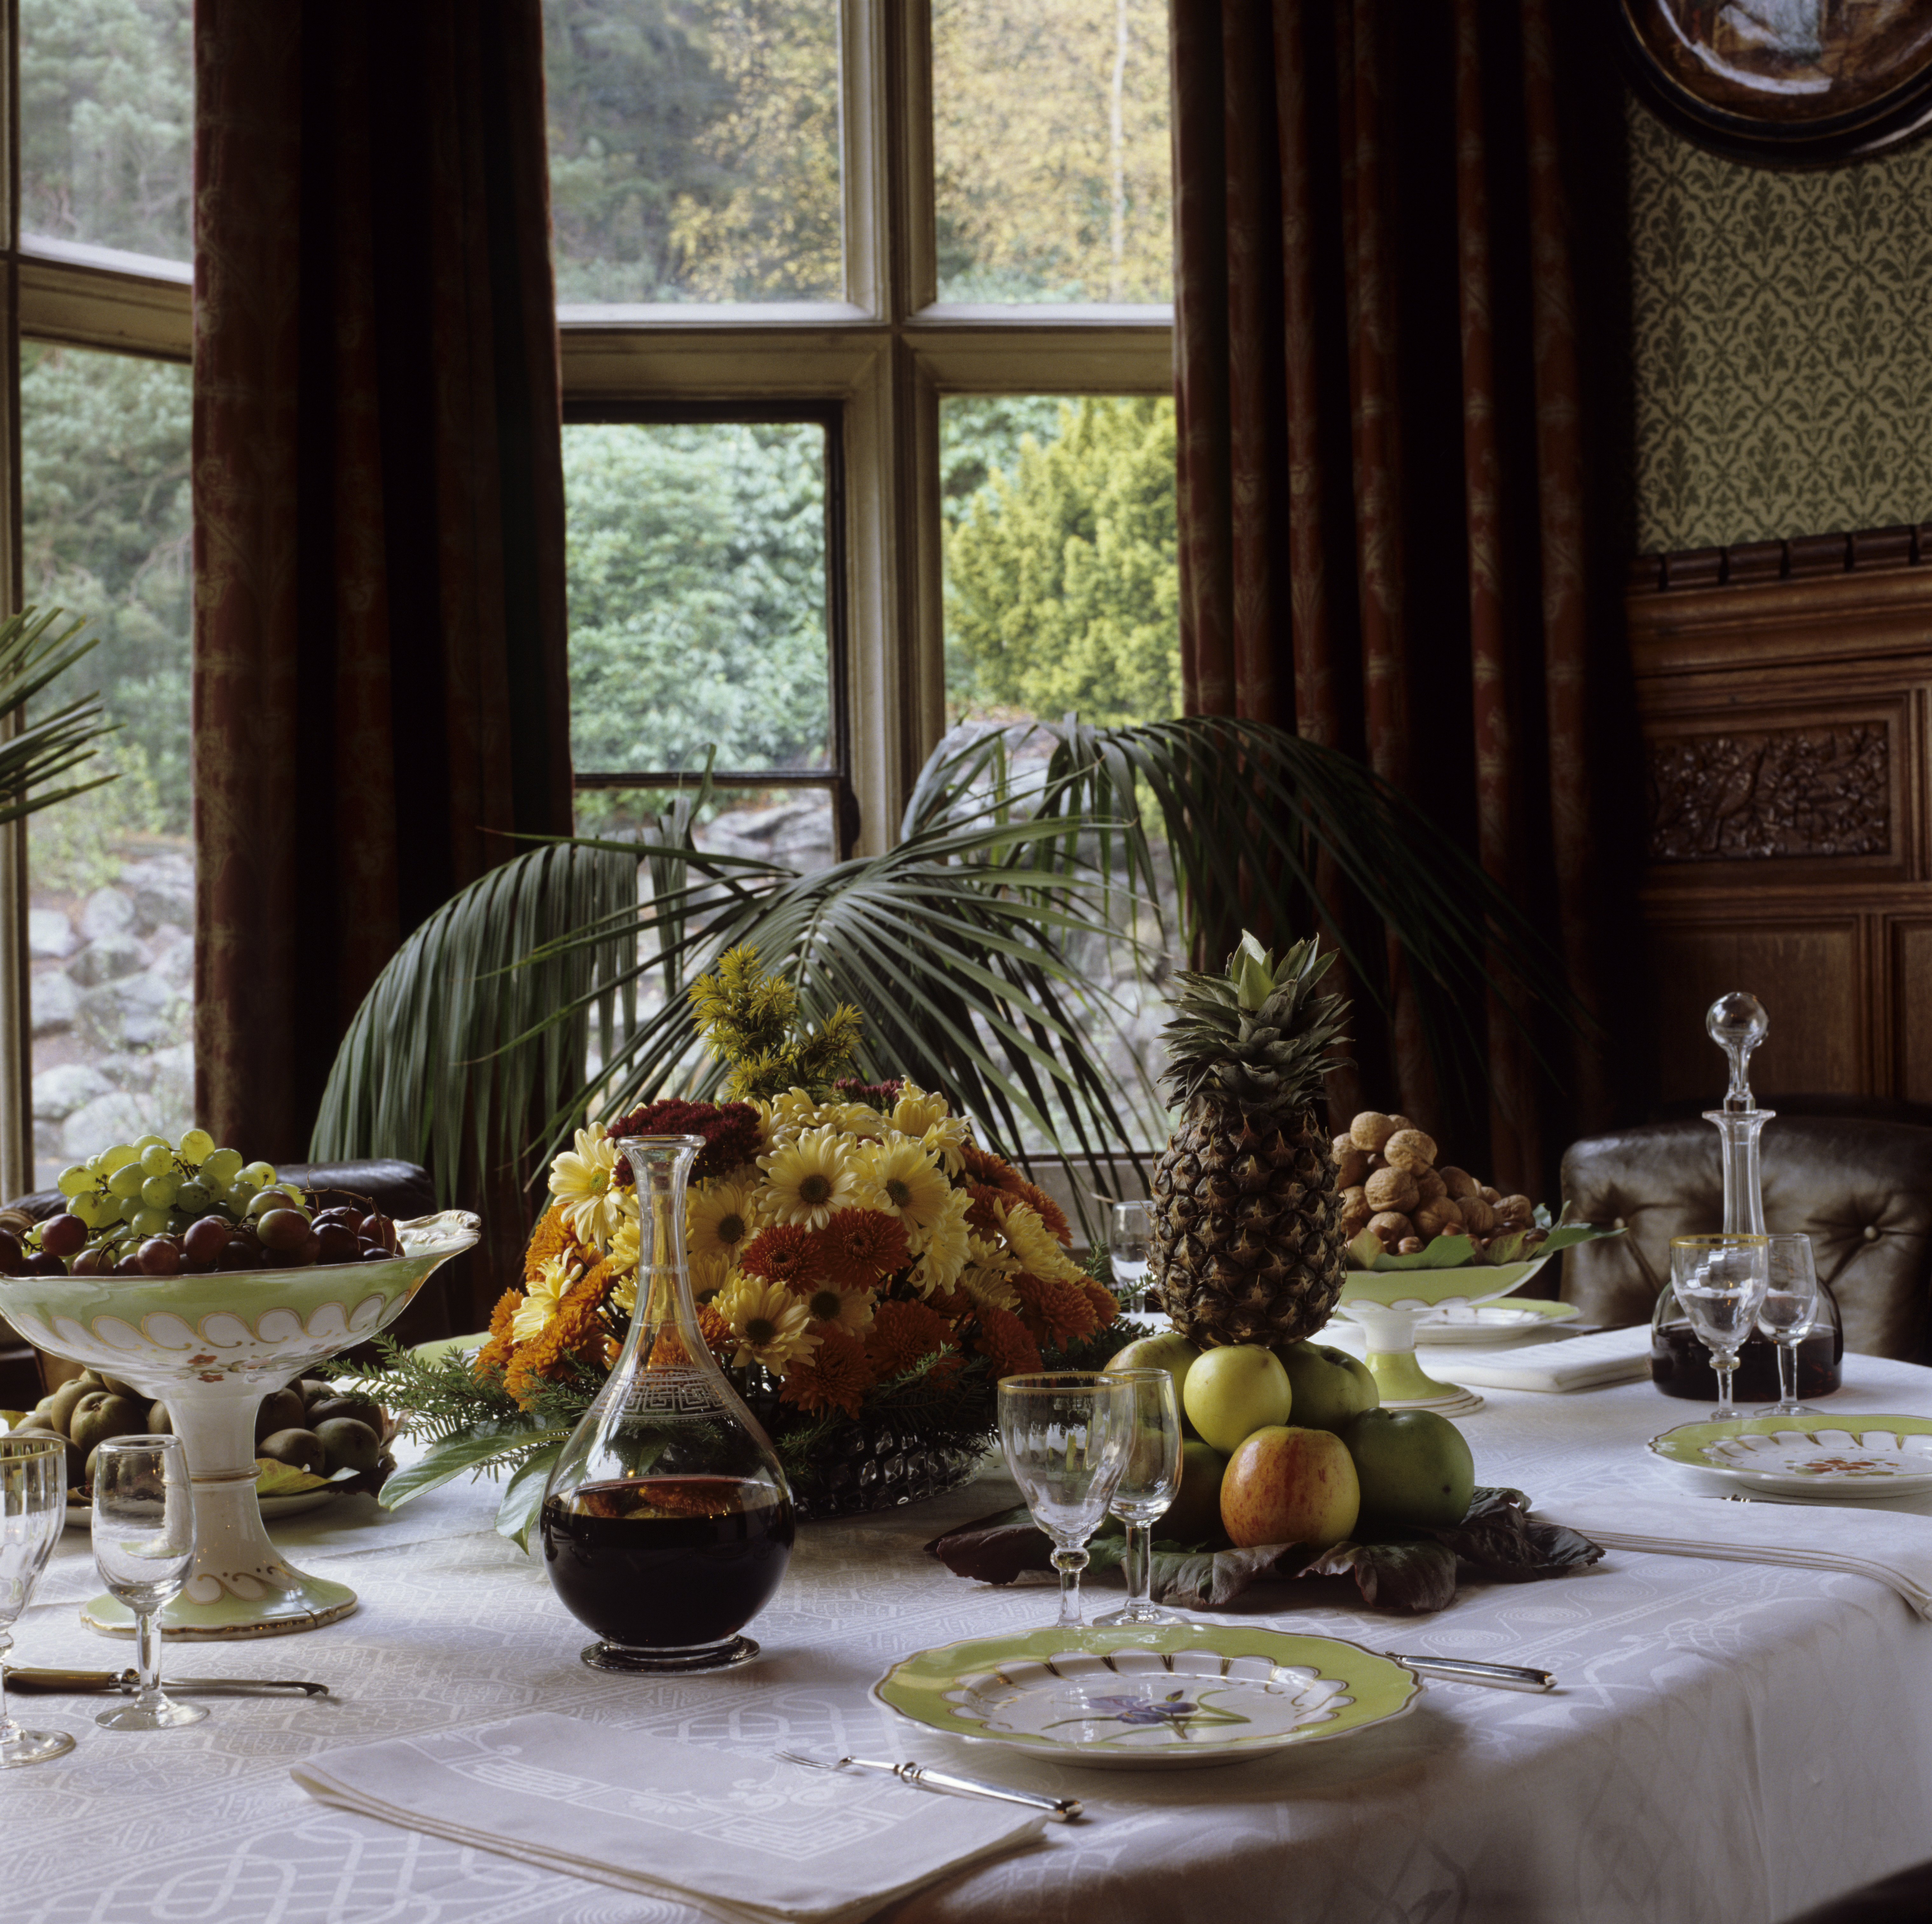 The dining table at Cragside, set for a dessert course with fruit and cheese ©National Trust Images Andreas von Einsiedel